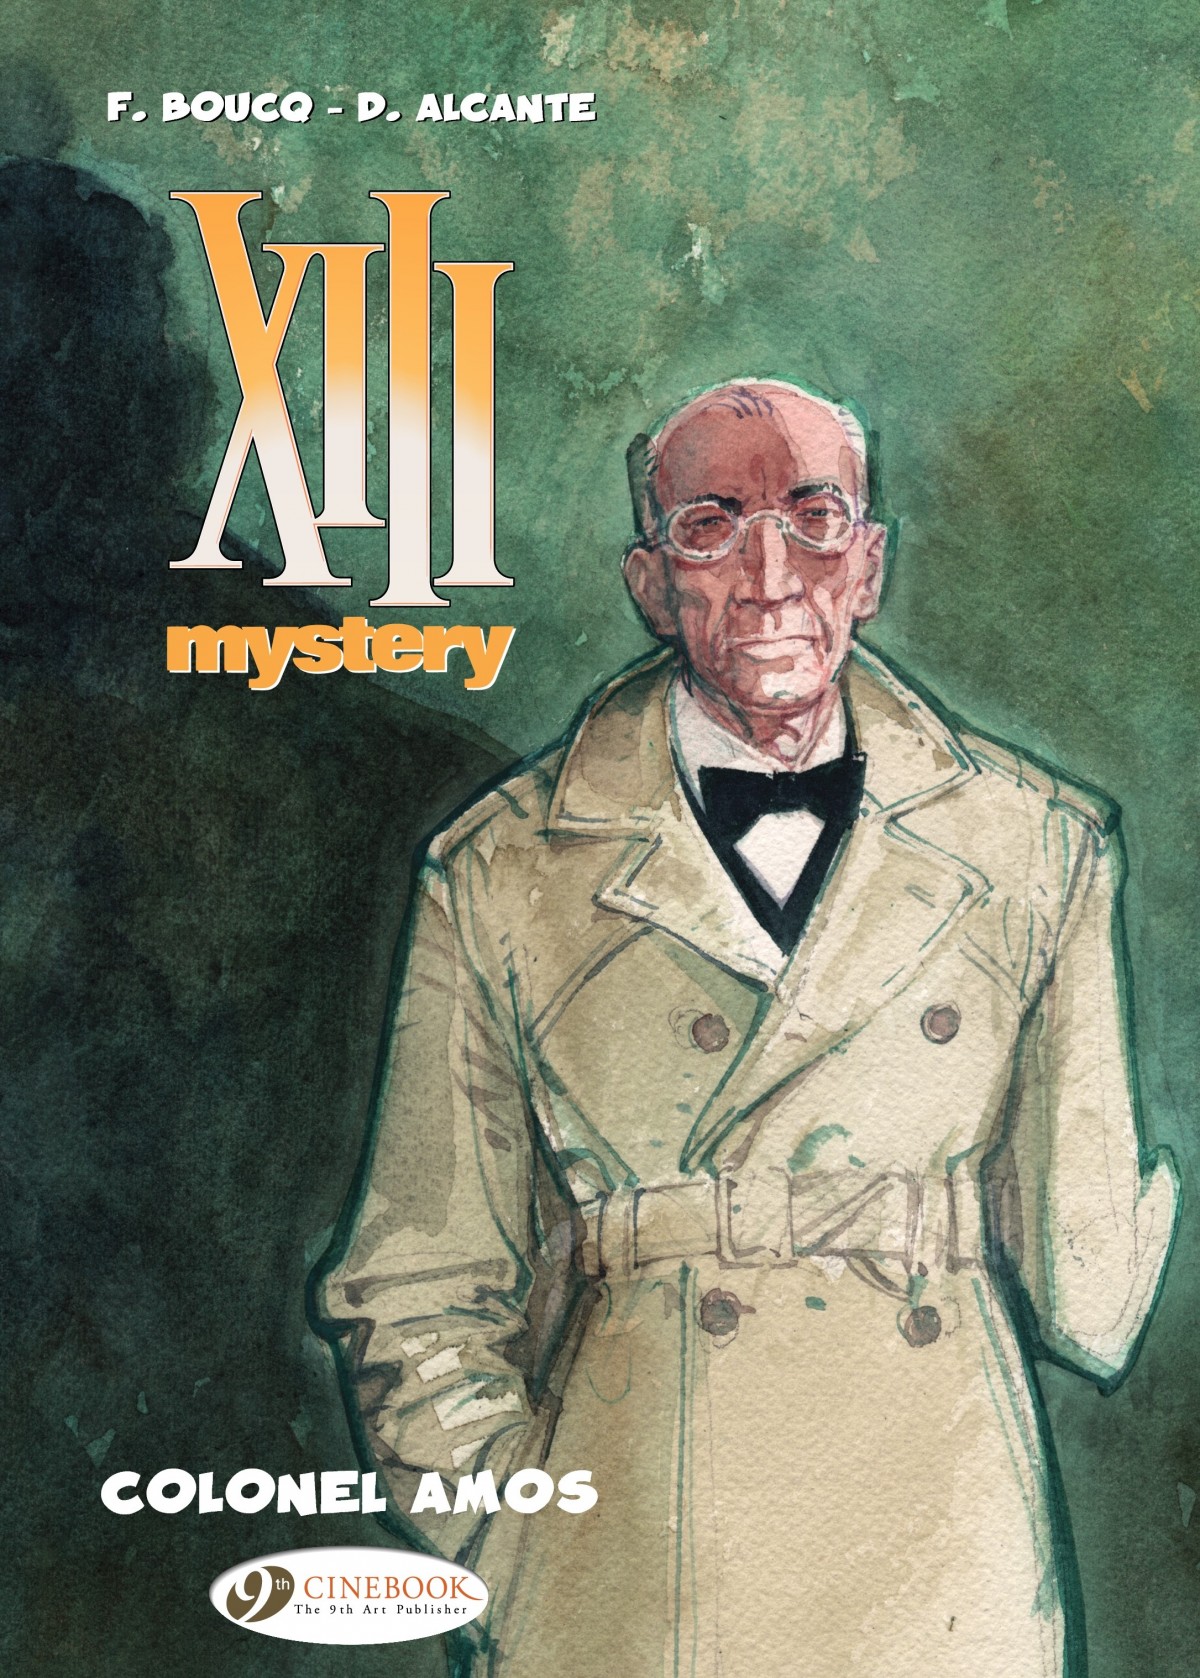 Read online XIII Mystery comic -  Issue #4 - 1